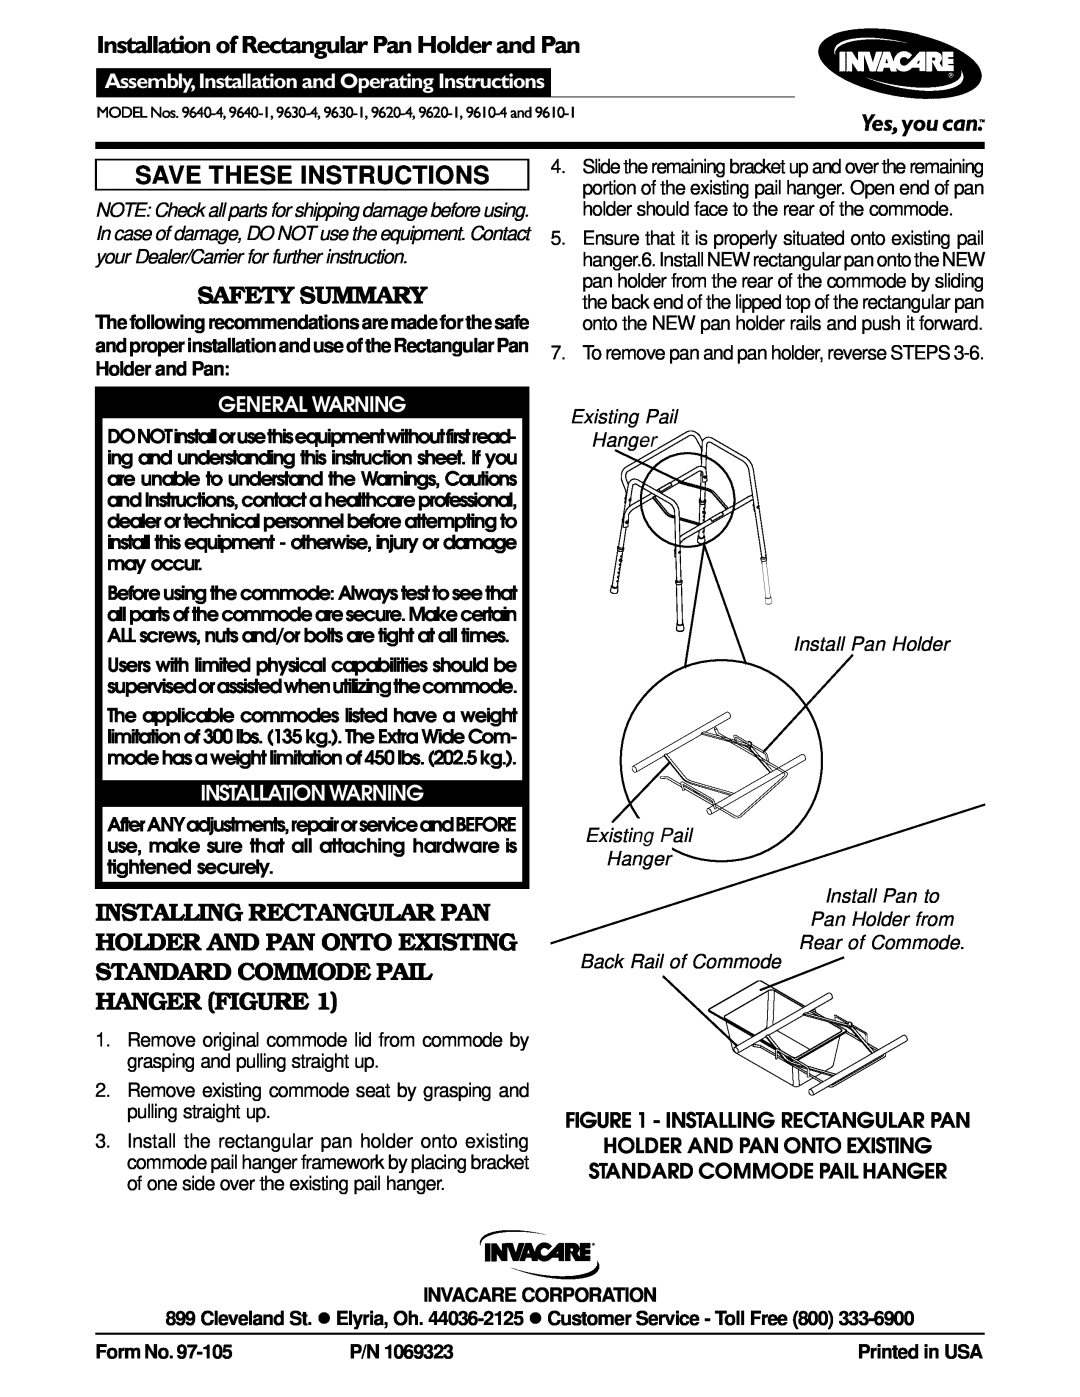 Invacare 9630-4 instruction sheet Installation of Rectangular Pan Holder and Pan, Save These Instructions, Safety Summary 